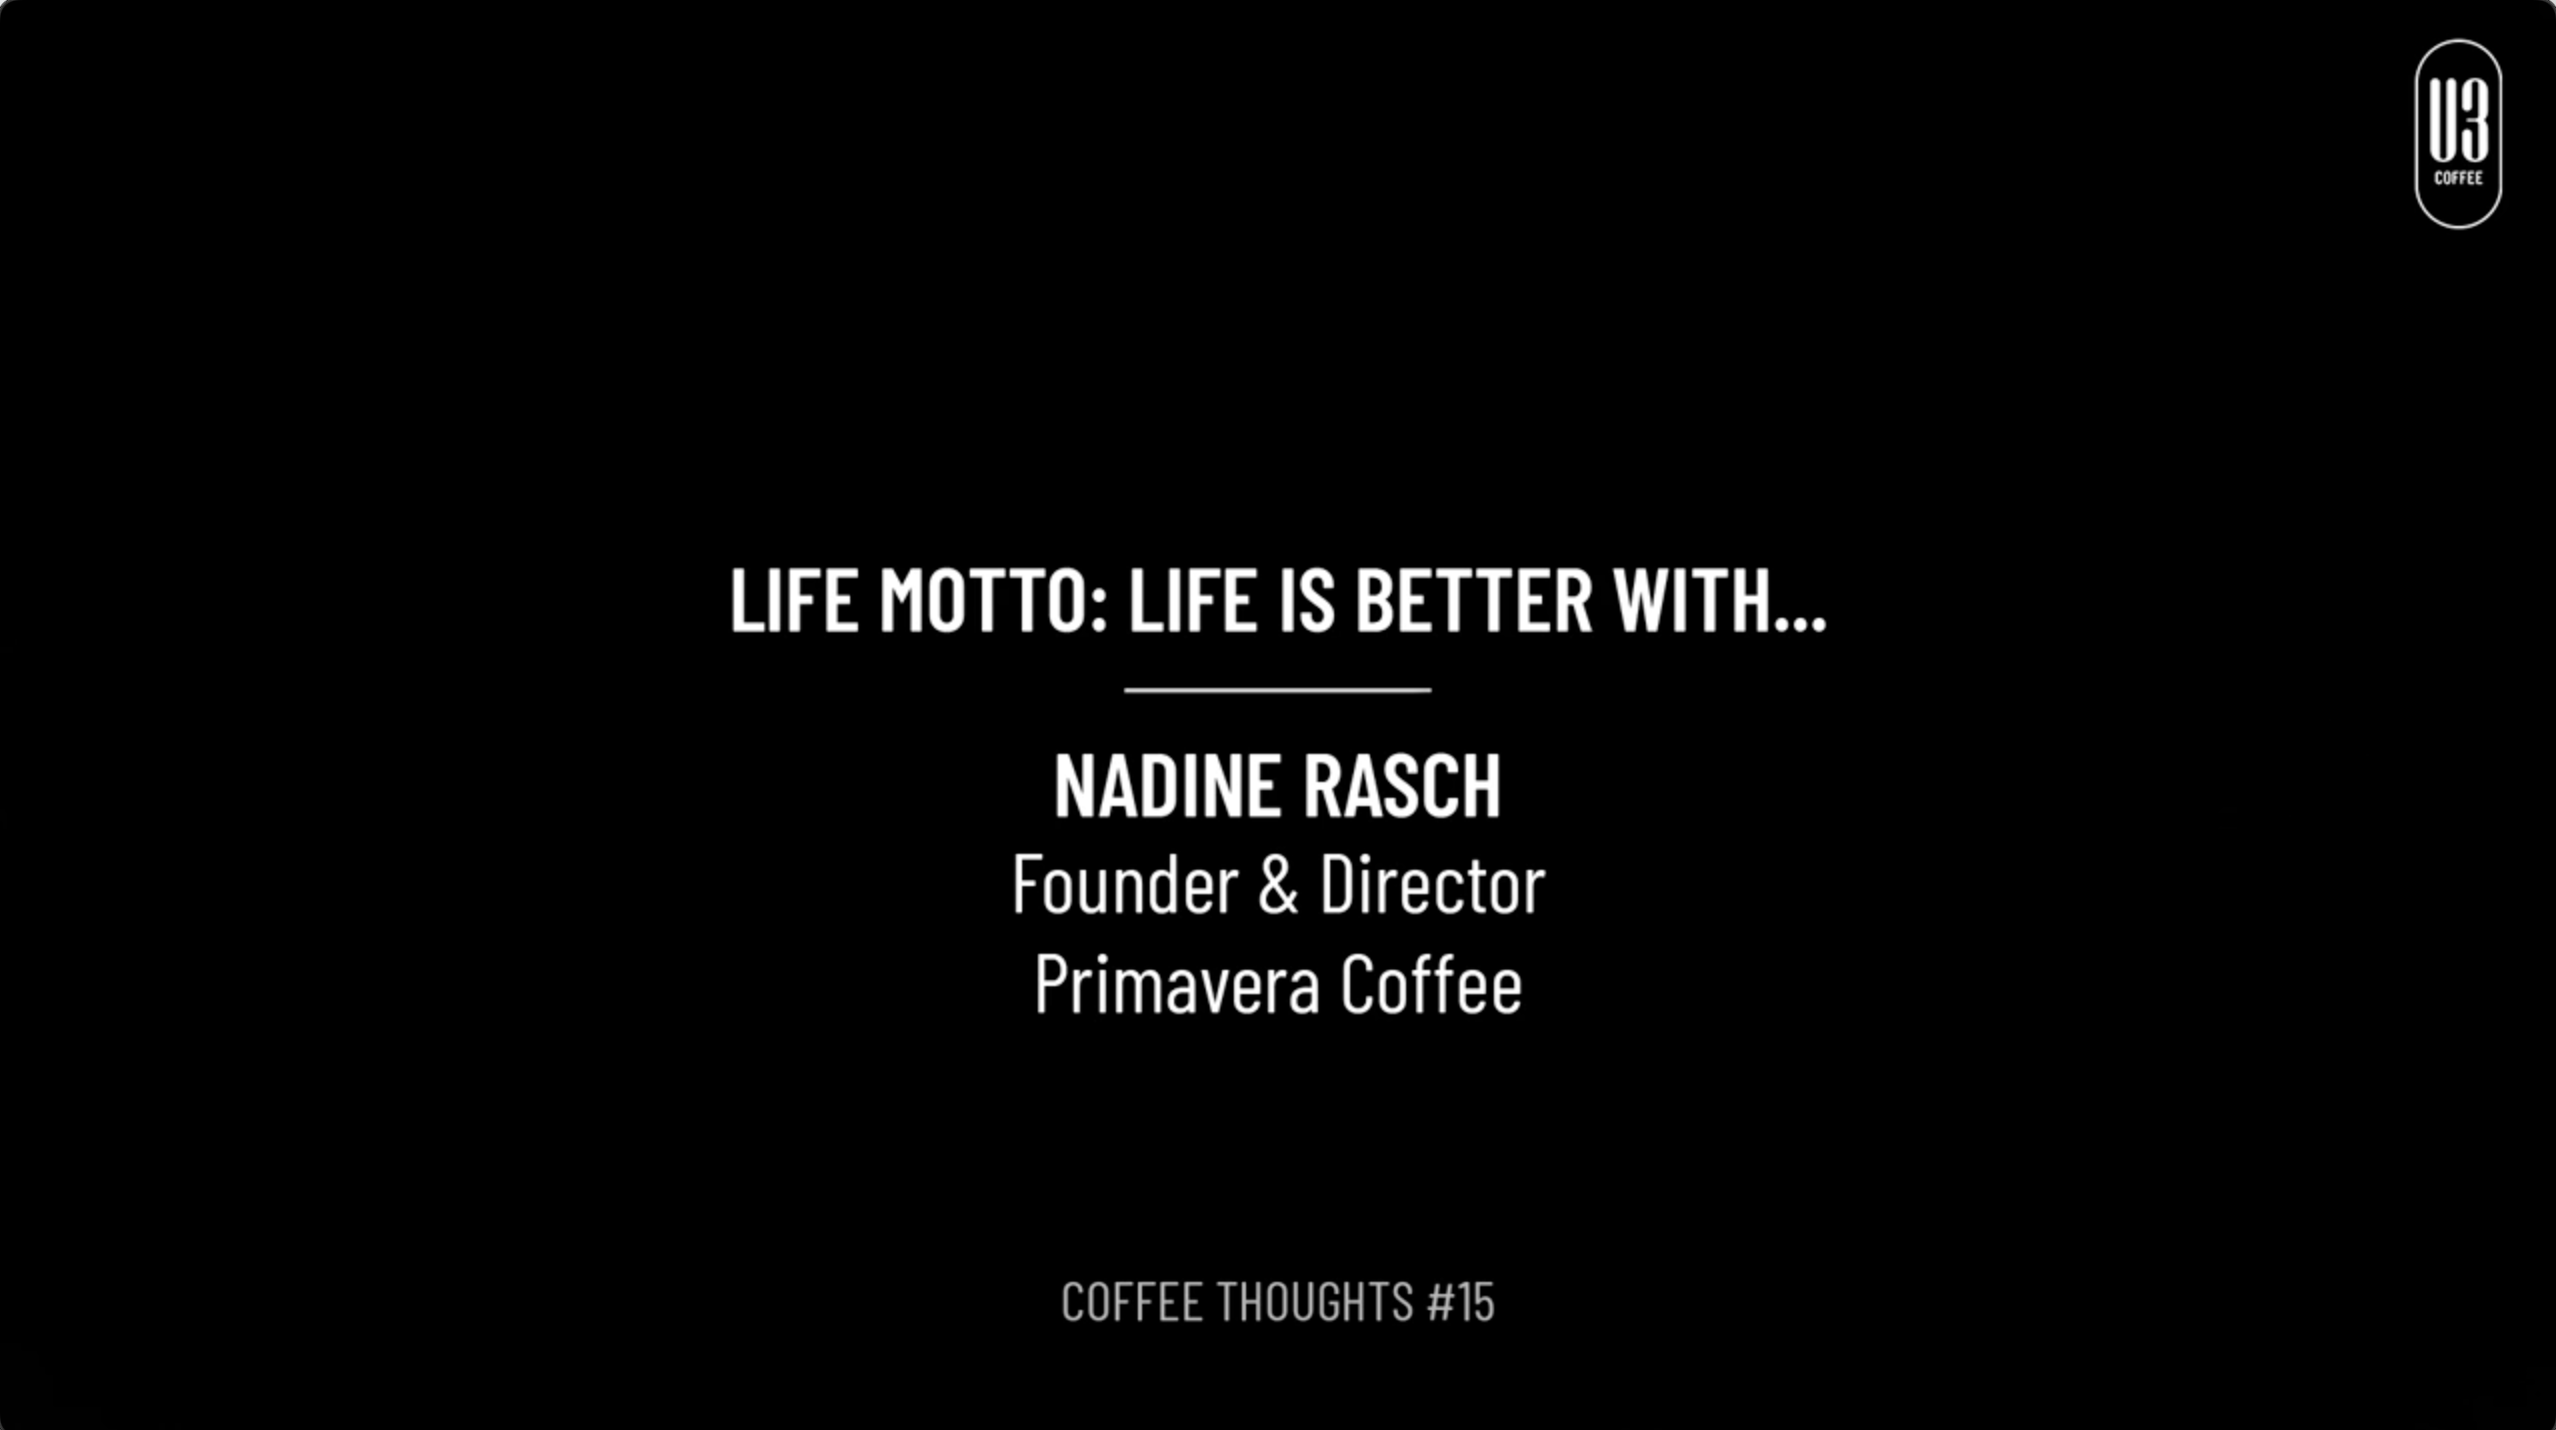 Nadine Rasch, Founder & Director of Primavera Coffee gives her life motto.